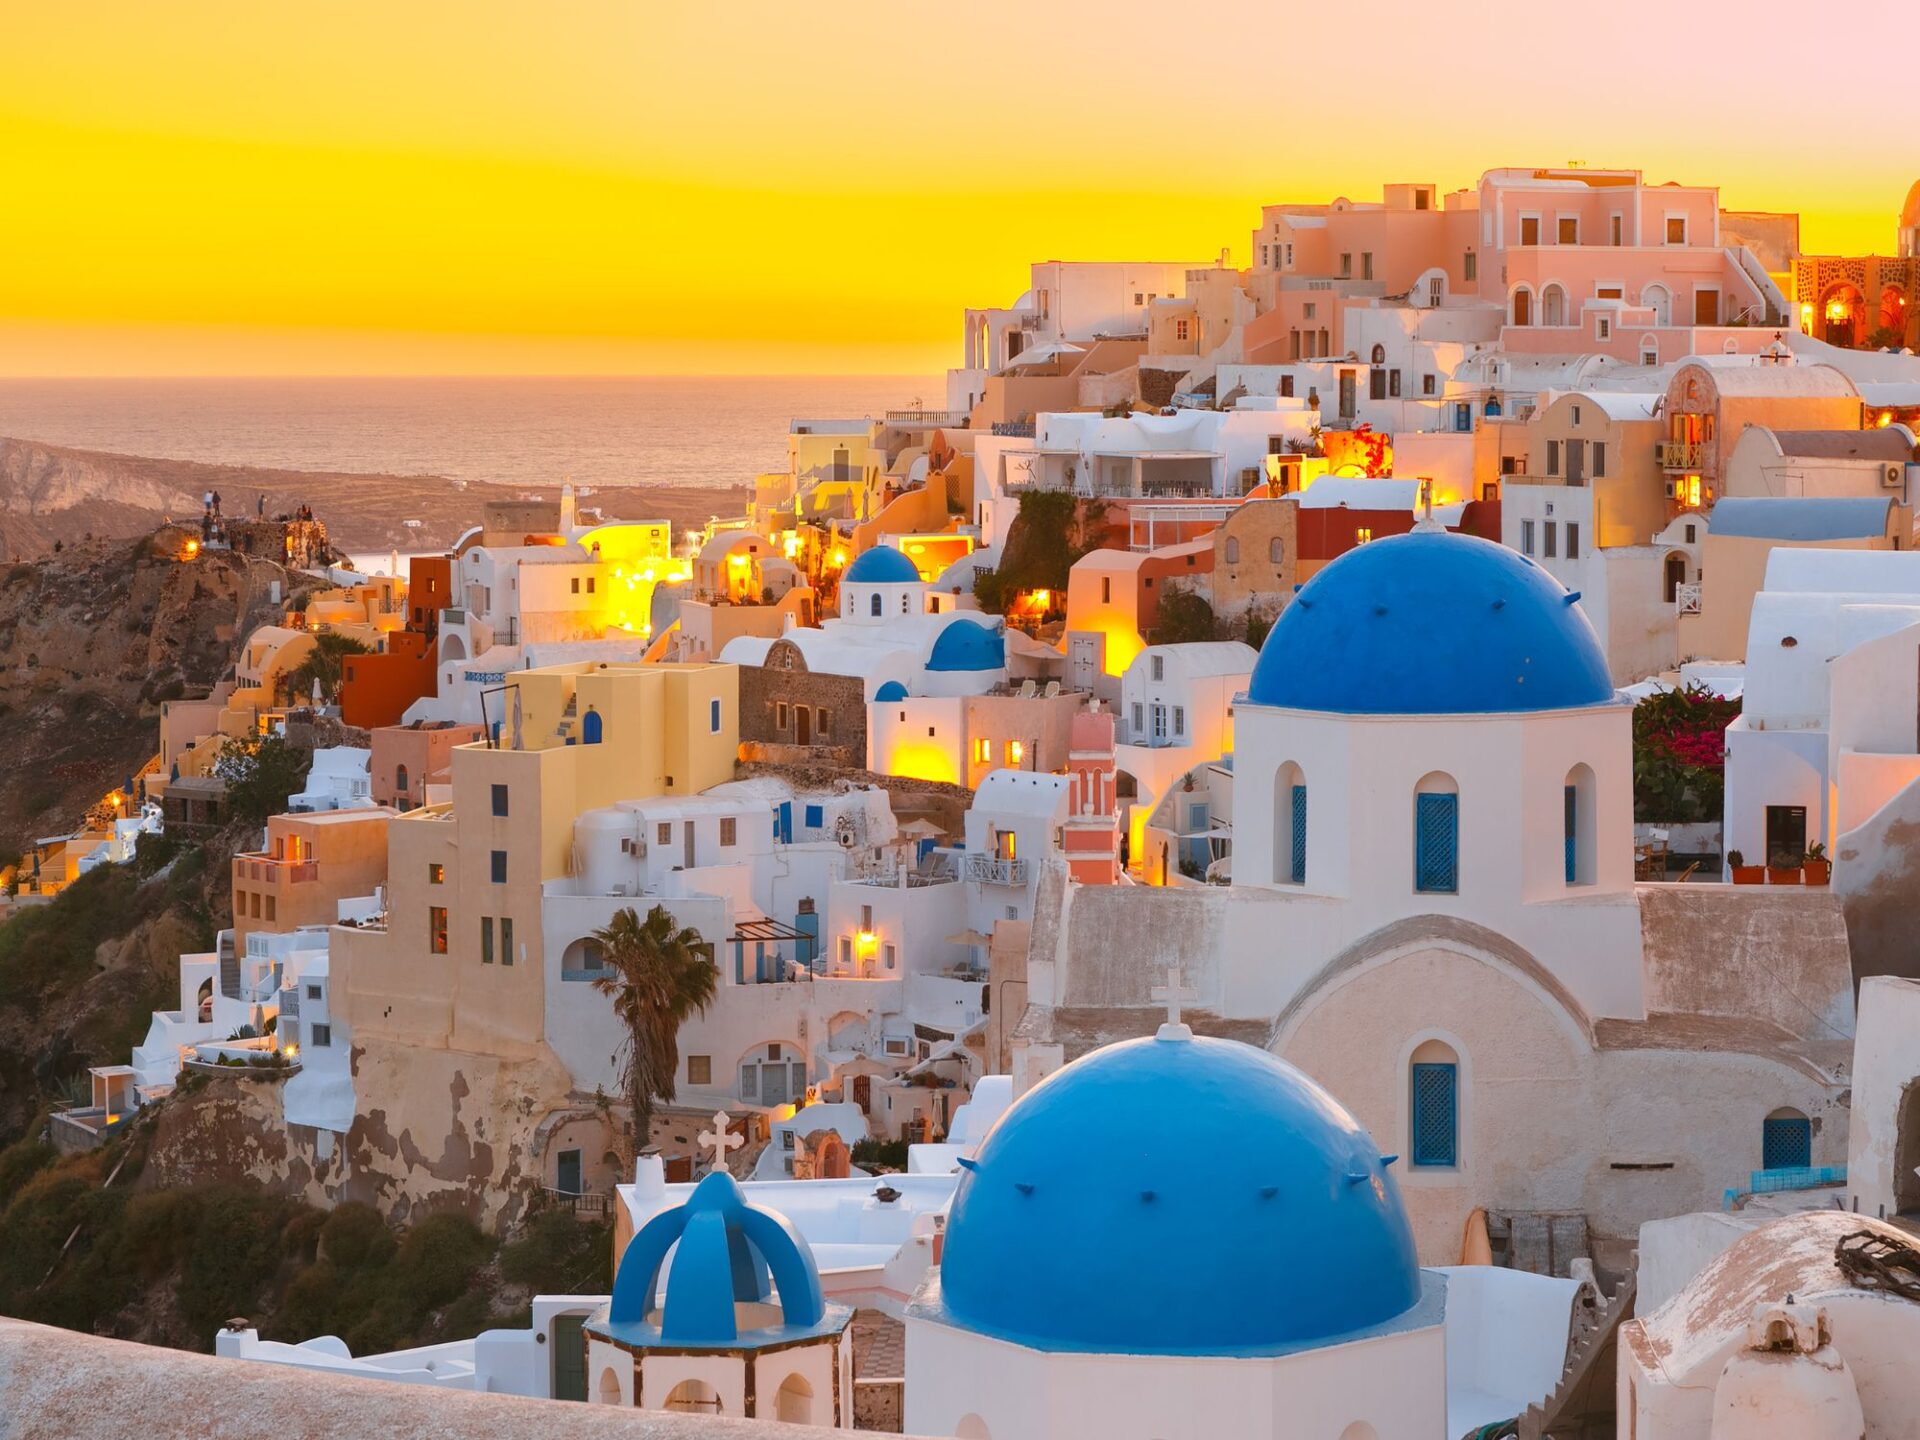 Best European Countries To Visit in Summer from UAE - Greece